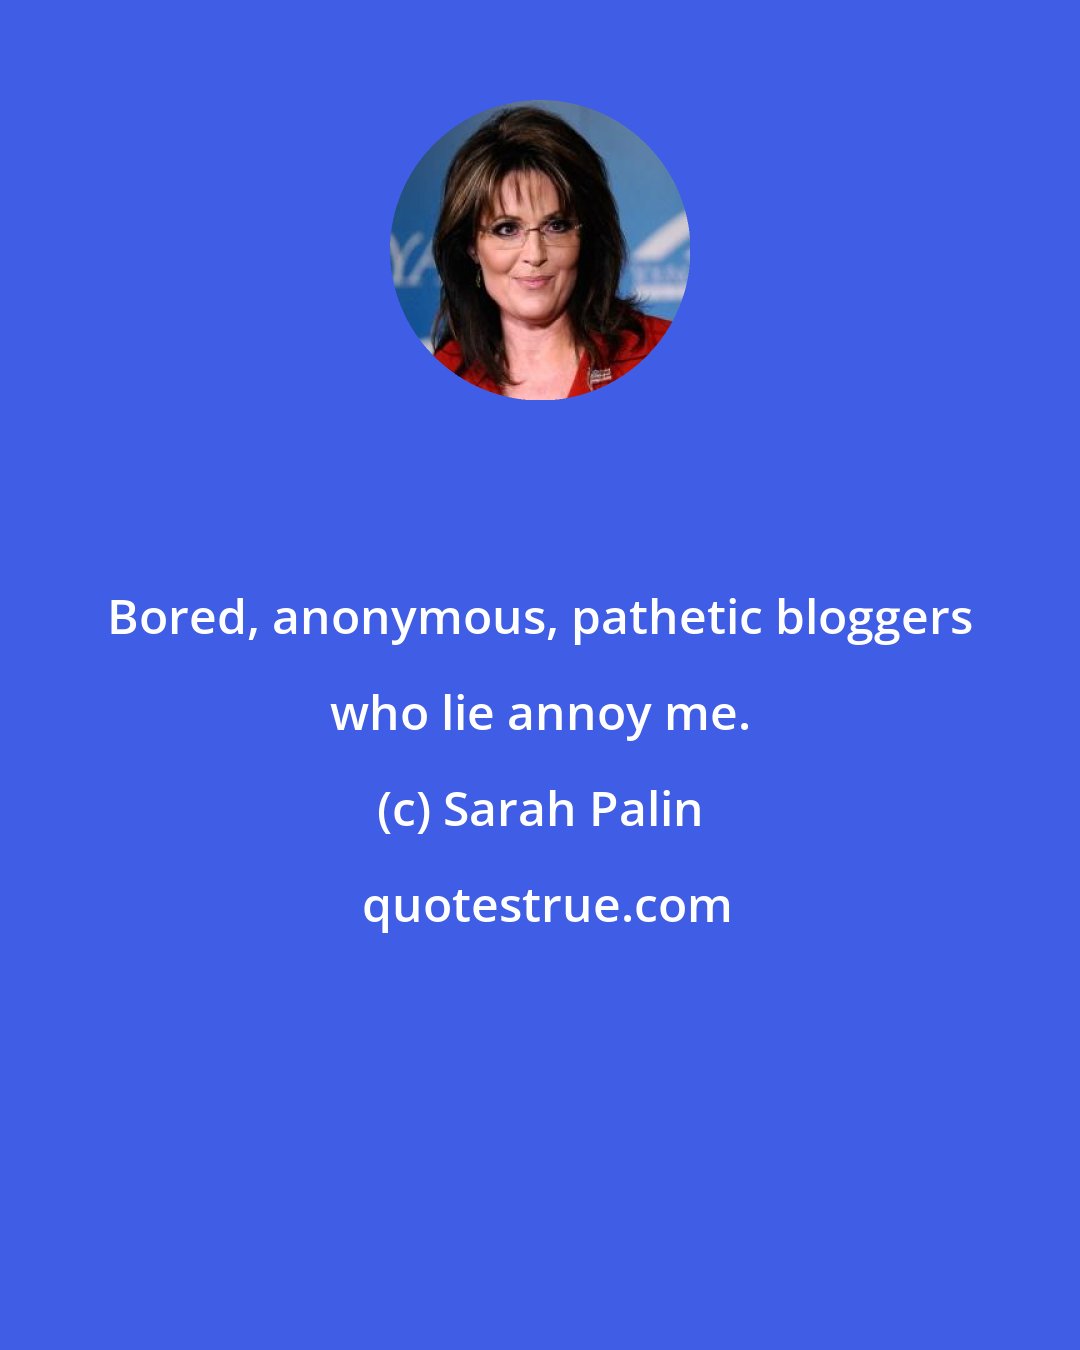 Sarah Palin: Bored, anonymous, pathetic bloggers who lie annoy me.